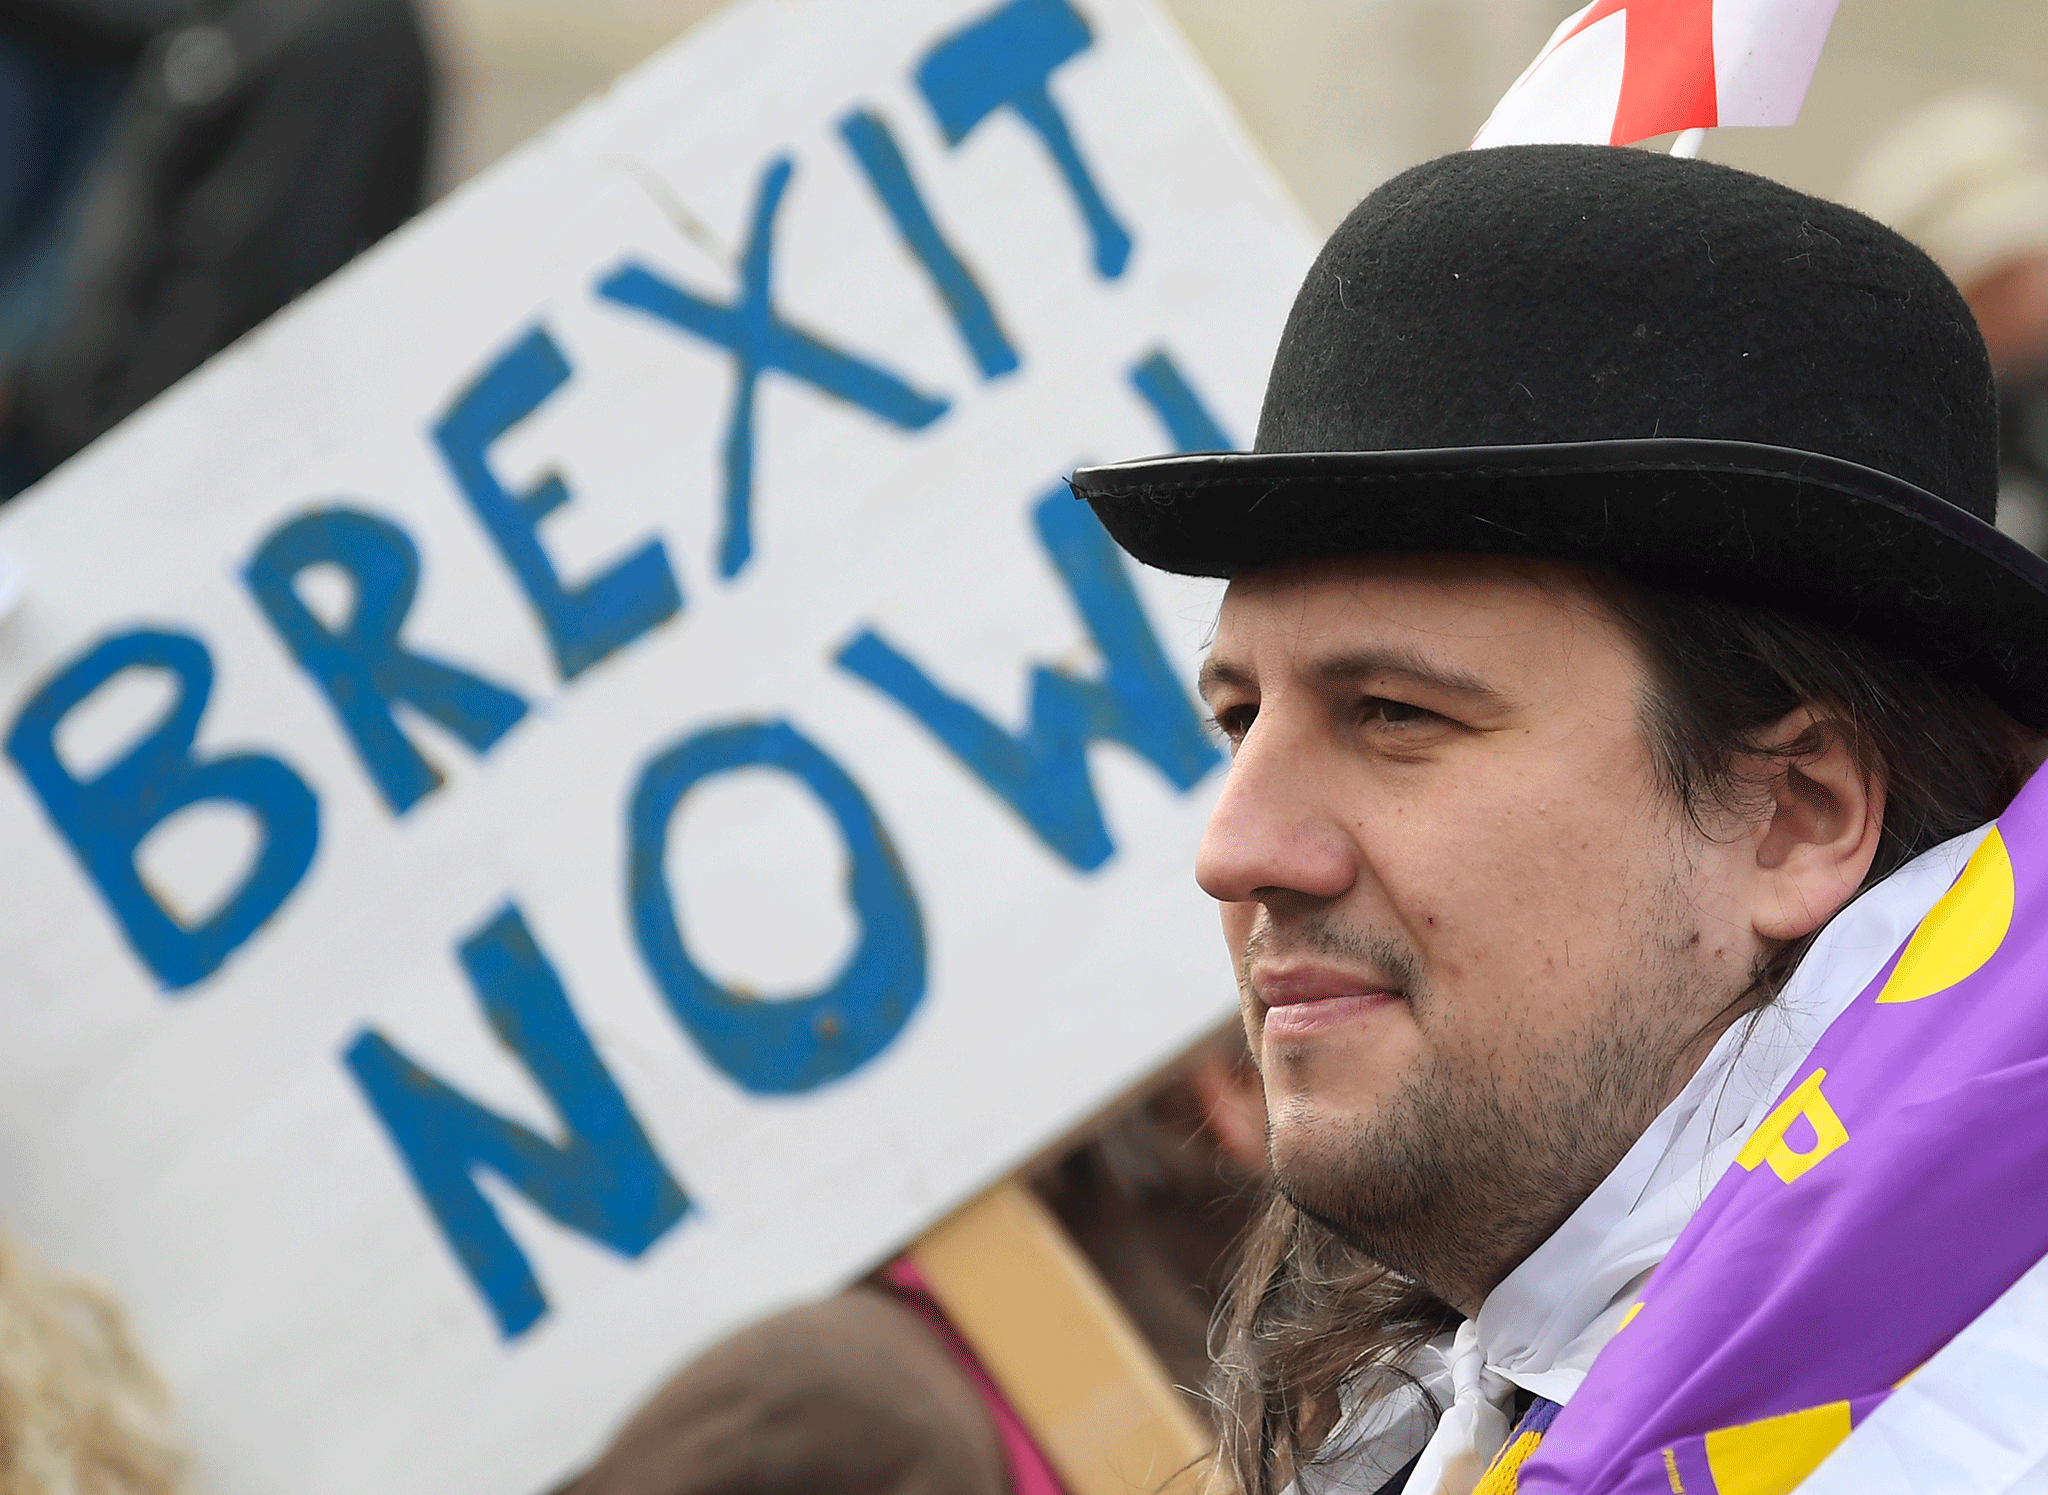 Four per cent of Leave voters thought Brexit was the worst event of 2016